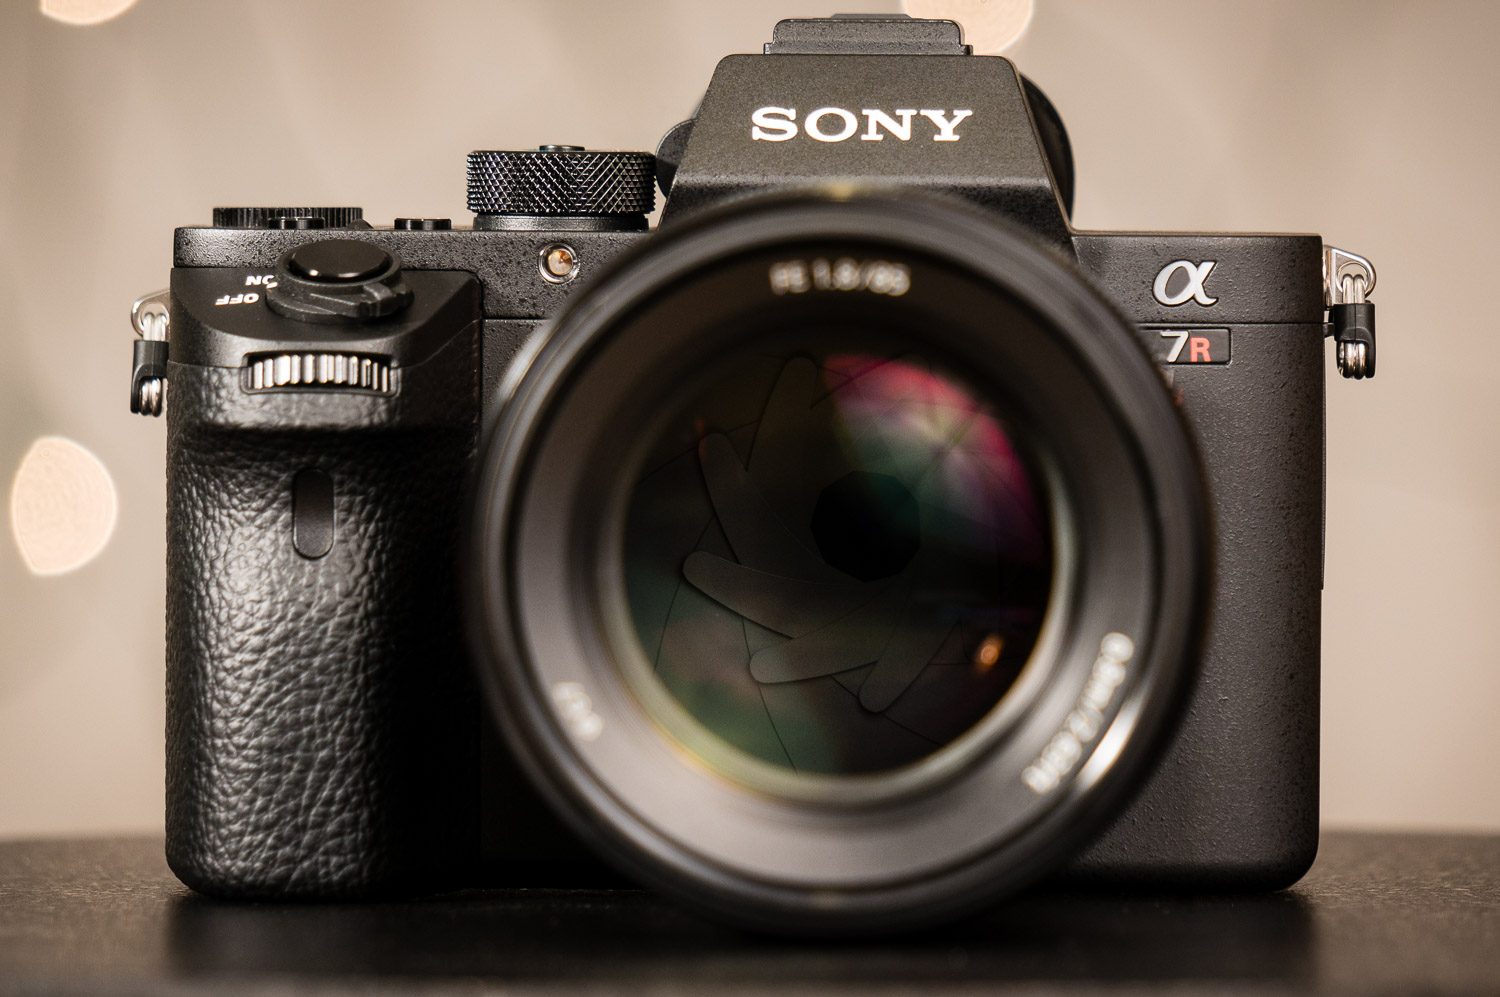 Sony FE 85mm f/1.8 Lens Review